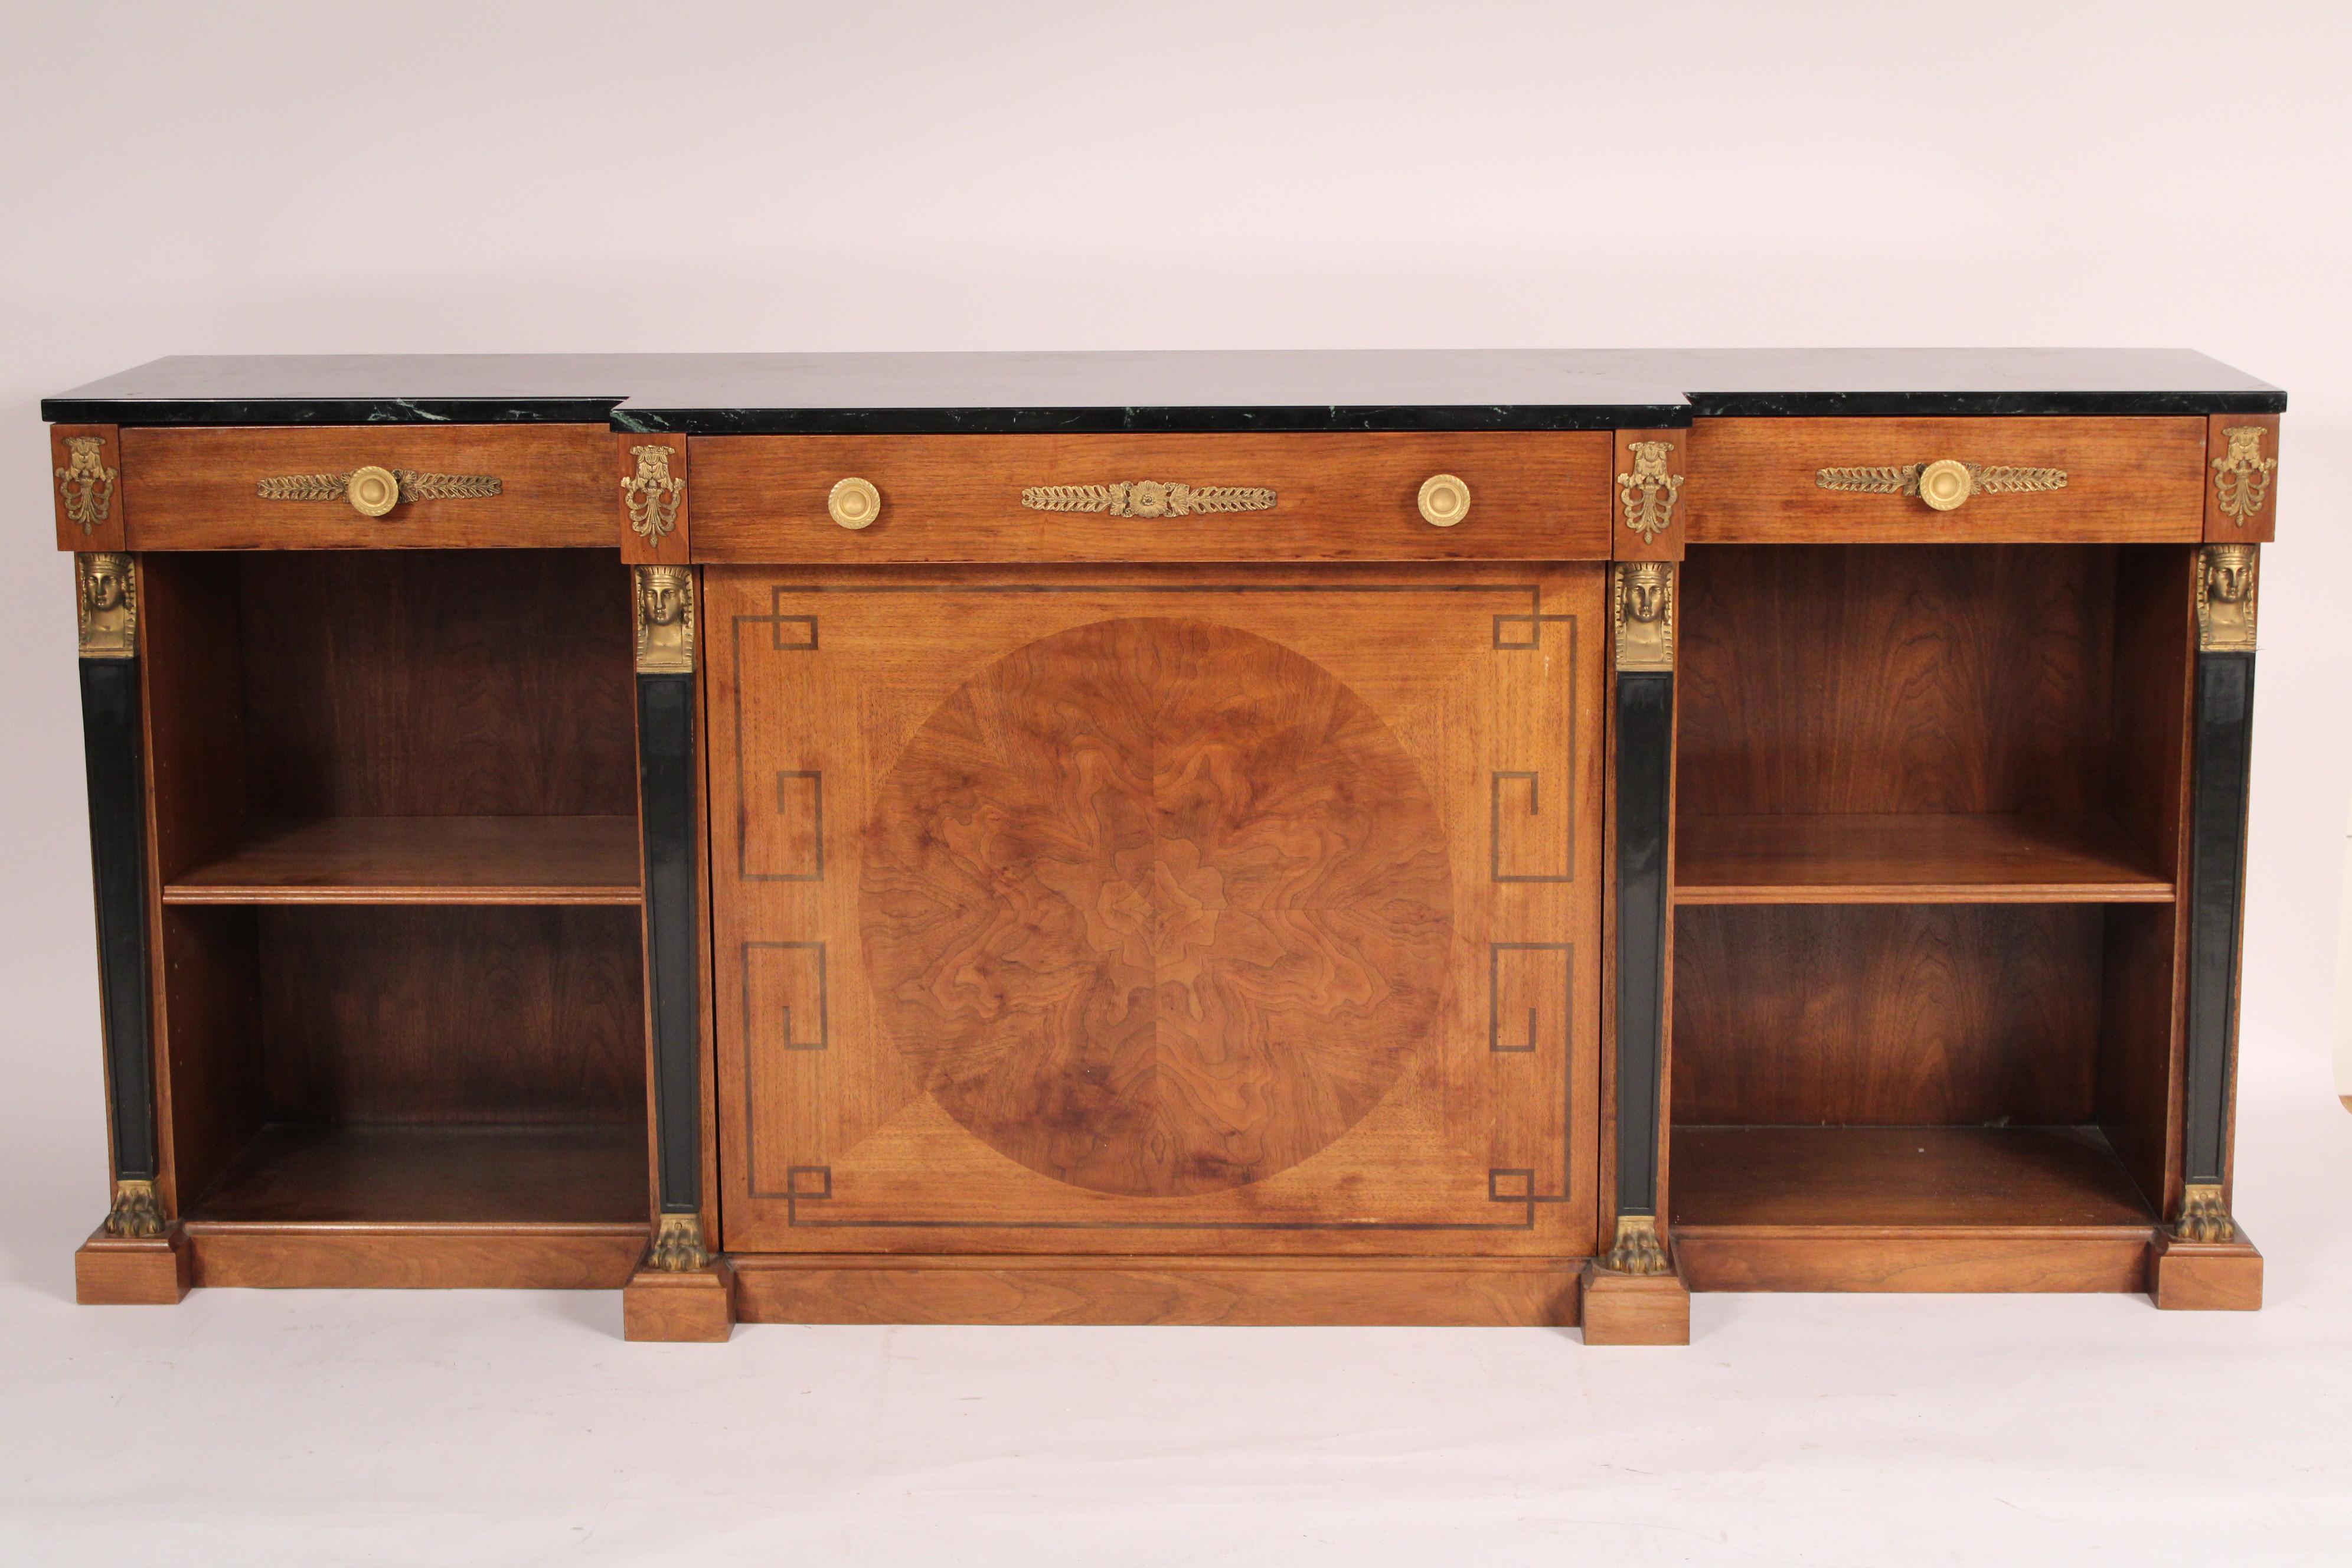 Empire style mahogany sideboard / bookcase with marble top and gilt bronze mounts, circa 1970s. With marble top, three frieze drawers, two bookcases on either side of a central door with large circular burl panel, 4 black lacquer columns with gilt